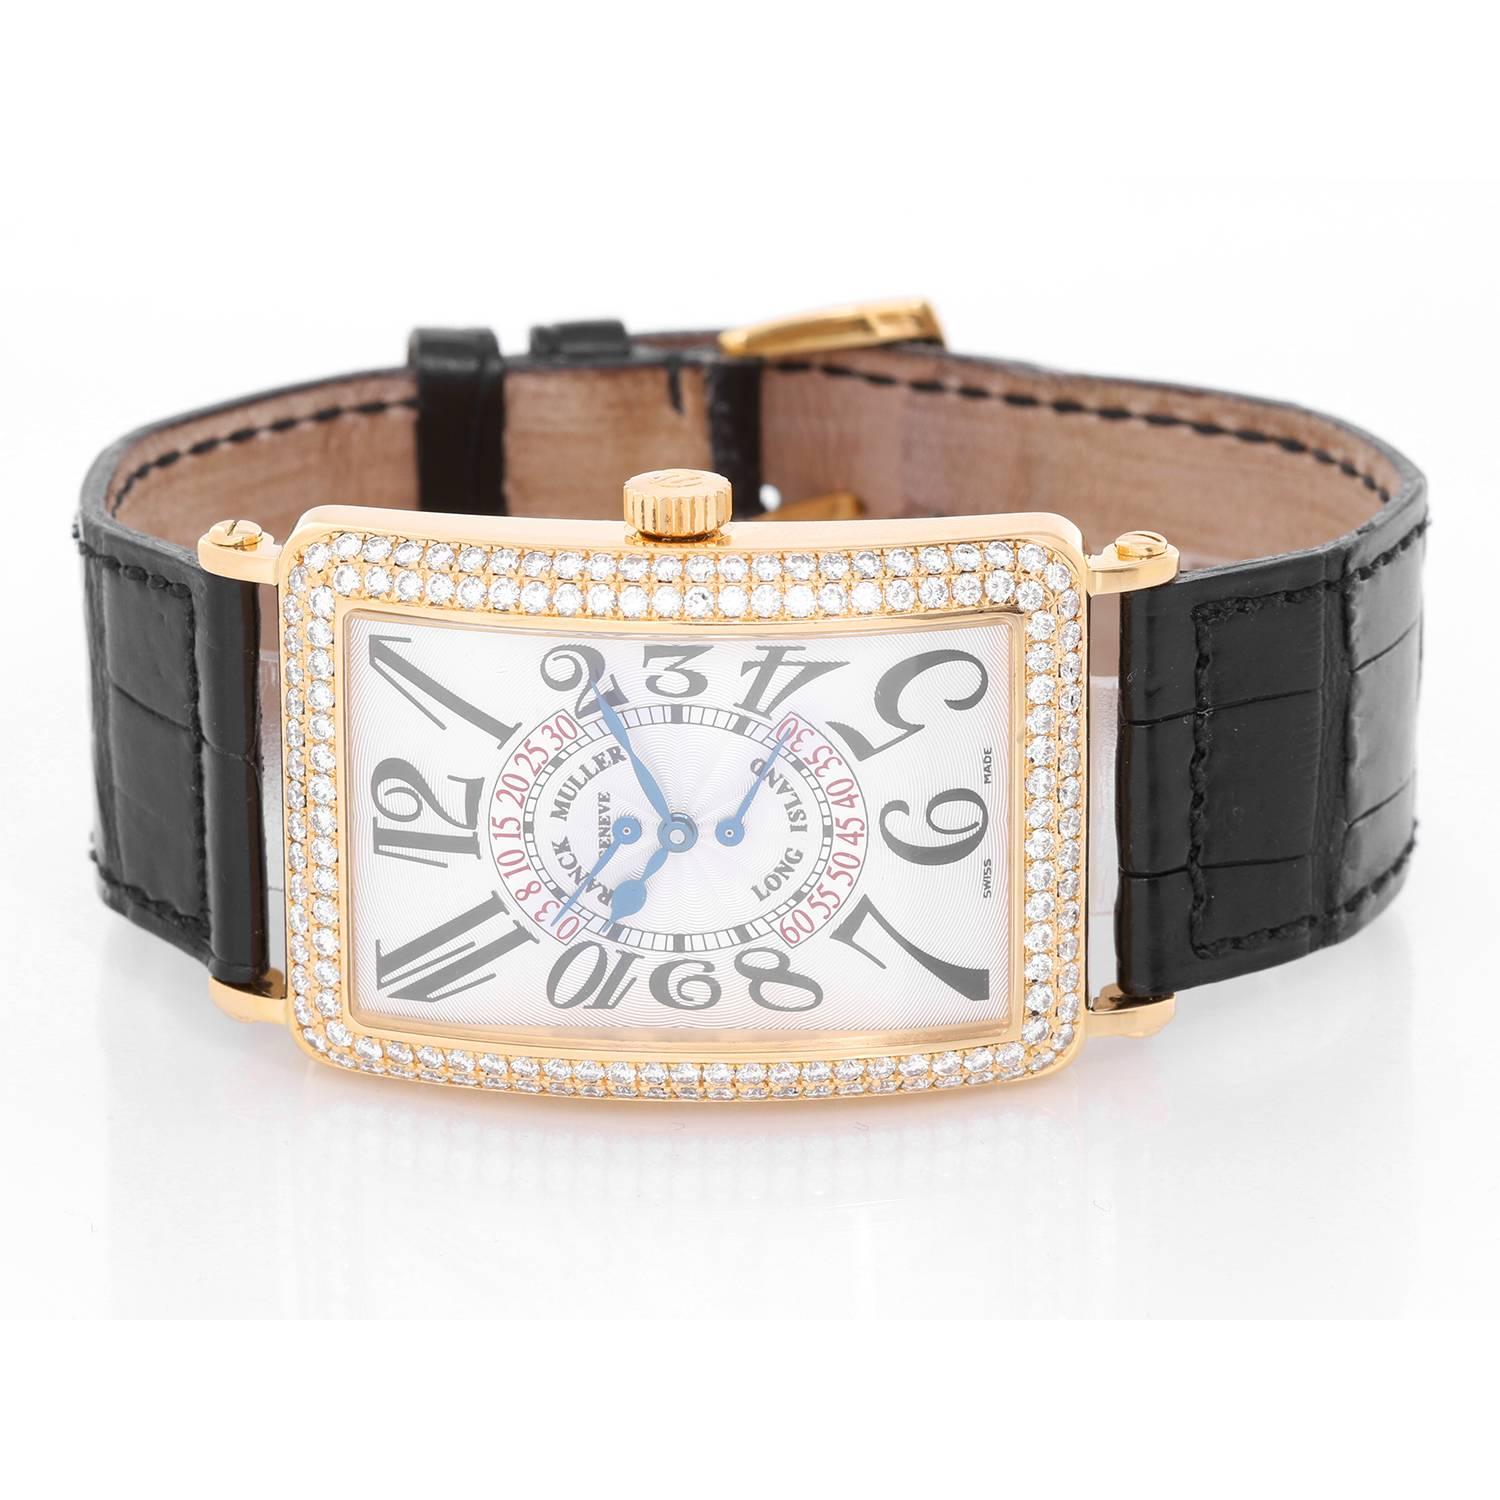 Franck Muller 18K Yellow Gold Long Island Watch -  Automatic. 18K Yellow gold ( 33 mm x 45 mm ) 2.71 cts. Of Round brilliant cut diamonds on bezel. Crème Guilloche dial with Arabic numerals. Brown alligator strap with 18K Yellow gold diamond tang